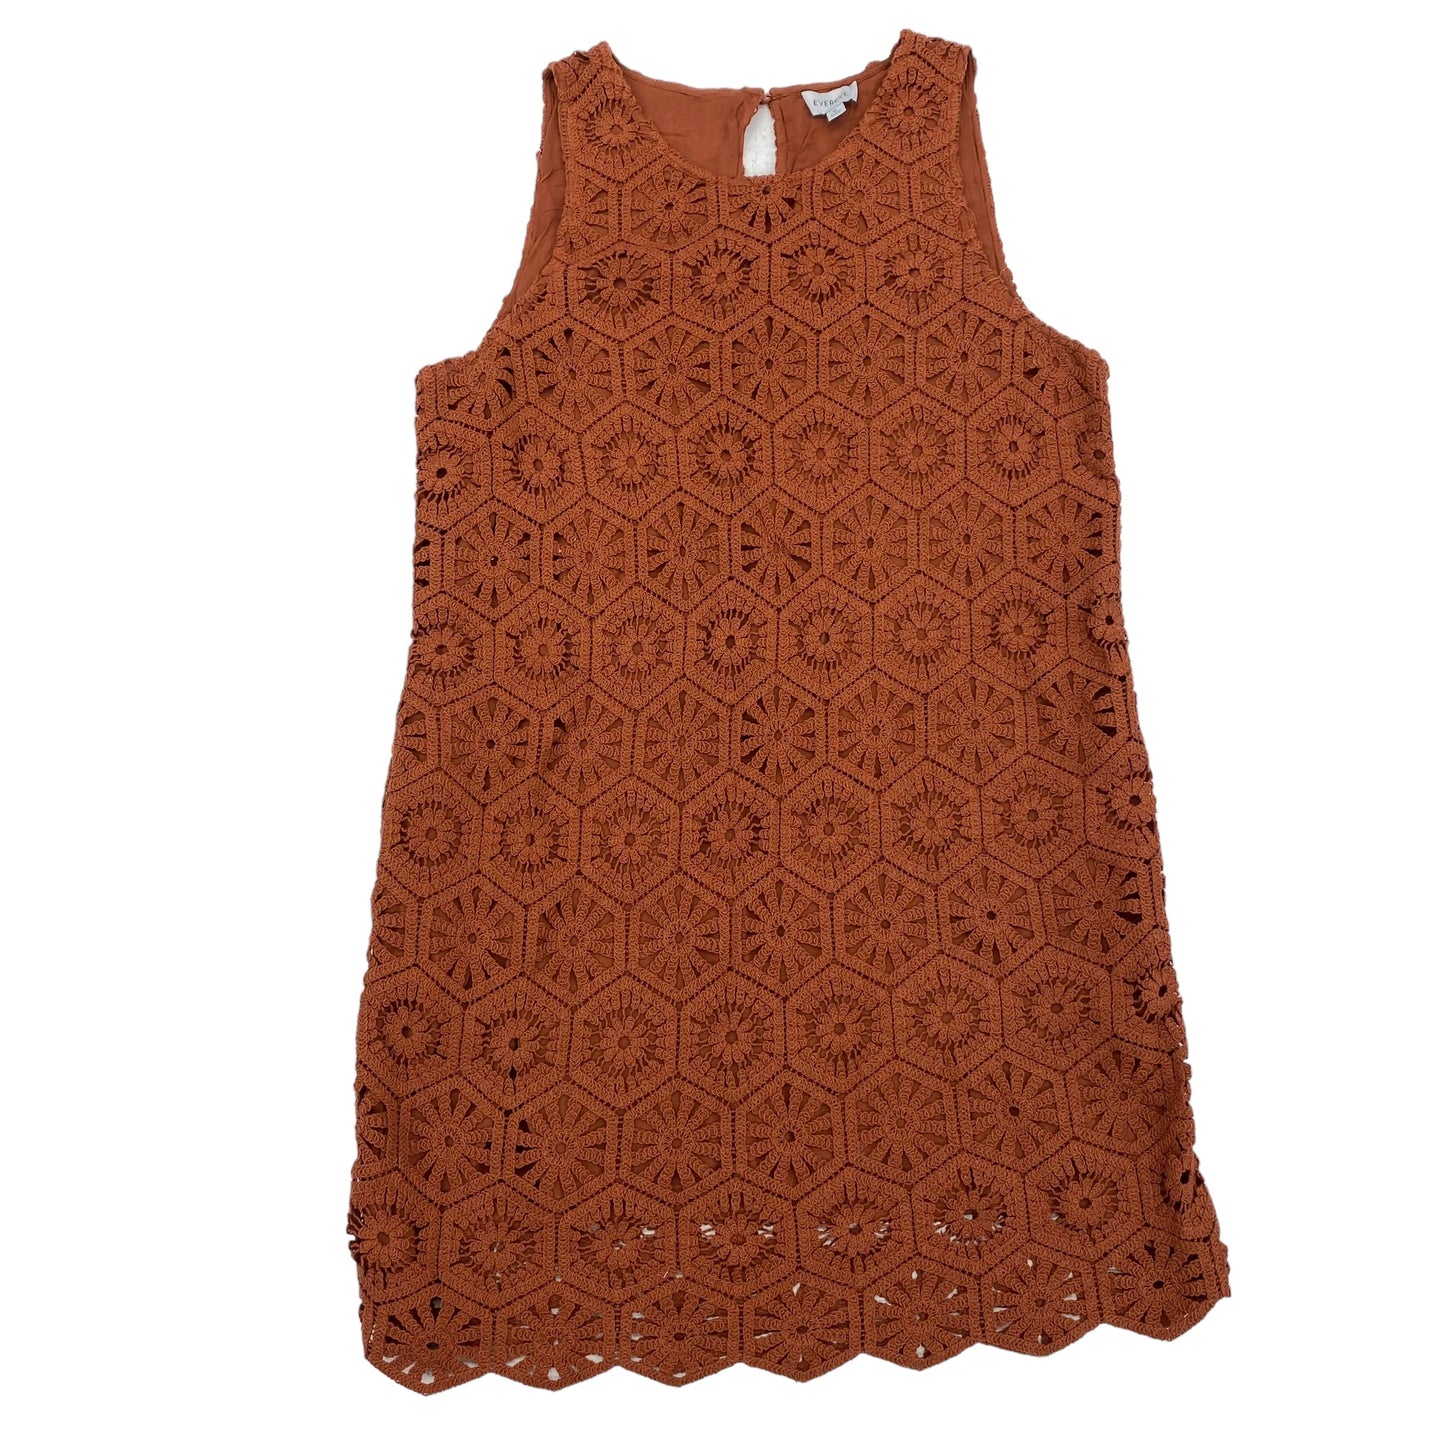 BROWN DRESS CASUAL SHORT by EVEREVE Size:XL